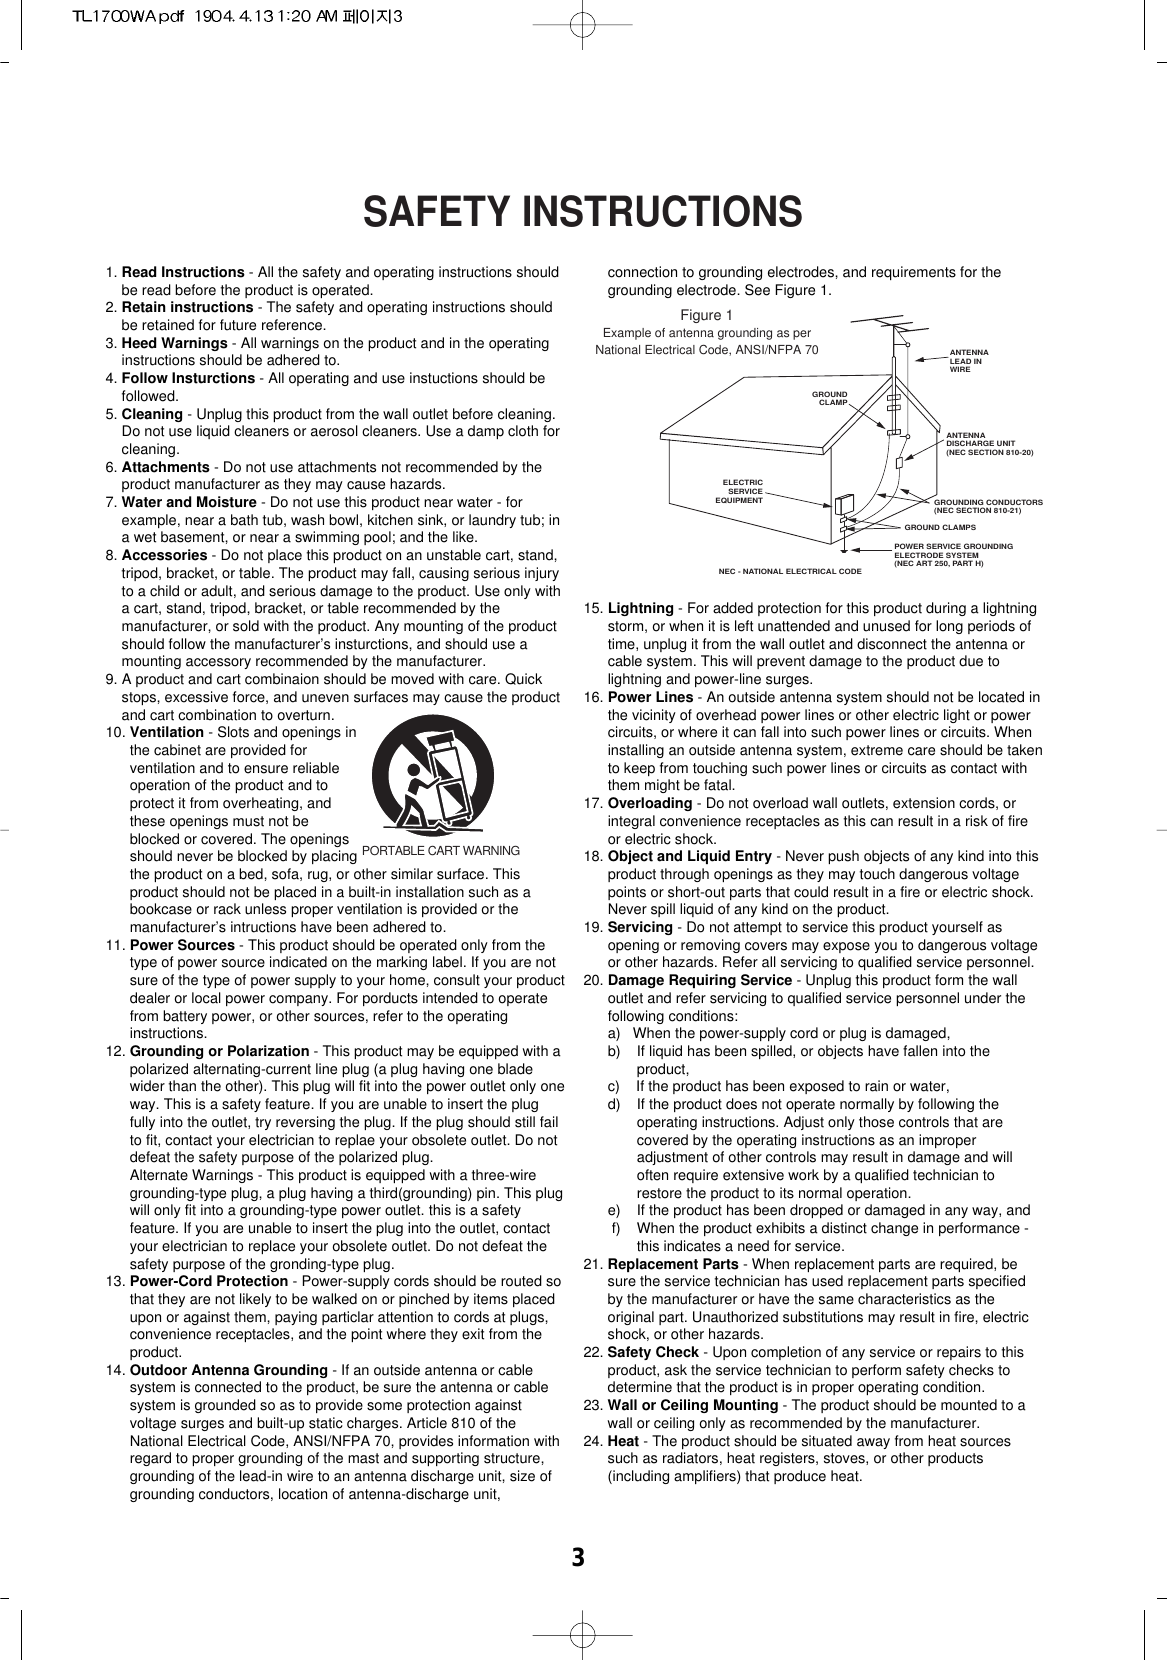 31. Read Instructions - All the safety and operating instructions shouldbe read before the product is operated.2. Retain instructions - The safety and operating instructions shouldbe retained for future reference.3. Heed Warnings - All warnings on the product and in the operatinginstructions should be adhered to.4. Follow Insturctions - All operating and use instuctions should befollowed.5. Cleaning - Unplug this product from the wall outlet before cleaning.Do not use liquid cleaners or aerosol cleaners. Use a damp cloth forcleaning.6. Attachments - Do not use attachments not recommended by theproduct manufacturer as they may cause hazards.7. Water and Moisture - Do not use this product near water - forexample, near a bath tub, wash bowl, kitchen sink, or laundry tub; ina wet basement, or near a swimming pool; and the like.8. Accessories - Do not place this product on an unstable cart, stand,tripod, bracket, or table. The product may fall, causing serious injuryto a child or adult, and serious damage to the product. Use only witha cart, stand, tripod, bracket, or table recommended by themanufacturer, or sold with the product. Any mounting of the productshould follow the manufacturer’s insturctions, and should use amounting accessory recommended by the manufacturer.9. A product and cart combinaion should be moved with care. Quickstops, excessive force, and uneven surfaces may cause the productand cart combination to overturn.10. Ventilation - Slots and openings inthe cabinet are provided forventilation and to ensure reliableoperation of the product and toprotect it from overheating, andthese openings must not beblocked or covered. The openingsshould never be blocked by placingthe product on a bed, sofa, rug, or other similar surface. Thisproduct should not be placed in a built-in installation such as abookcase or rack unless proper ventilation is provided or themanufacturer’s intructions have been adhered to.11. Power Sources - This product should be operated only from thetype of power source indicated on the marking label. If you are notsure of the type of power supply to your home, consult your productdealer or local power company. For porducts intended to operatefrom battery power, or other sources, refer to the operatinginstructions.12. Grounding or Polarization - This product may be equipped with apolarized alternating-current line plug (a plug having one bladewider than the other). This plug will fit into the power outlet only oneway. This is a safety feature. If you are unable to insert the plugfully into the outlet, try reversing the plug. If the plug should still failto fit, contact your electrician to replae your obsolete outlet. Do notdefeat the safety purpose of the polarized plug.Alternate Warnings - This product is equipped with a three-wiregrounding-type plug, a plug having a third(grounding) pin. This plugwill only fit into a grounding-type power outlet. this is a safetyfeature. If you are unable to insert the plug into the outlet, contactyour electrician to replace your obsolete outlet. Do not defeat thesafety purpose of the gronding-type plug.13. Power-Cord Protection - Power-supply cords should be routed sothat they are not likely to be walked on or pinched by items placedupon or against them, paying particlar attention to cords at plugs,convenience receptacles, and the point where they exit from theproduct.14. Outdoor Antenna Grounding - If an outside antenna or cablesystem is connected to the product, be sure the antenna or cablesystem is grounded so as to provide some protection againstvoltage surges and built-up static charges. Article 810 of theNational Electrical Code, ANSI/NFPA 70, provides information withregard to proper grounding of the mast and supporting structure,grounding of the lead-in wire to an antenna discharge unit, size ofgrounding conductors, location of antenna-discharge unit,connection to grounding electrodes, and requirements for thegrounding electrode. See Figure 1.15. Lightning - For added protection for this product during a lightningstorm, or when it is left unattended and unused for long periods oftime, unplug it from the wall outlet and disconnect the antenna orcable system. This will prevent damage to the product due tolightning and power-line surges.16. Power Lines - An outside antenna system should not be located inthe vicinity of overhead power lines or other electric light or powercircuits, or where it can fall into such power lines or circuits. Wheninstalling an outside antenna system, extreme care should be takento keep from touching such power lines or circuits as contact withthem might be fatal.17. Overloading - Do not overload wall outlets, extension cords, orintegral convenience receptacles as this can result in a risk of fireor electric shock.18. Object and Liquid Entry - Never push objects of any kind into thisproduct through openings as they may touch dangerous voltagepoints or short-out parts that could result in a fire or electric shock.Never spill liquid of any kind on the product.19. Servicing - Do not attempt to service this product yourself asopening or removing covers may expose you to dangerous voltageor other hazards. Refer all servicing to qualified service personnel.20. Damage Requiring Service - Unplug this product form the walloutlet and refer servicing to qualified service personnel under thefollowing conditions:a)   When the power-supply cord or plug is damaged,b)    If liquid has been spilled, or objects have fallen into theproduct,c)    If the product has been exposed to rain or water,d)    If the product does not operate normally by following theoperating instructions. Adjust only those controls that arecovered by the operating instructions as an improperadjustment of other controls may result in damage and willoften require extensive work by a qualified technician torestore the product to its normal operation.e)    If the product has been dropped or damaged in any way, andf)    When the product exhibits a distinct change in performance -this indicates a need for service.21. Replacement Parts - When replacement parts are required, besure the service technician has used replacement parts specifiedby the manufacturer or have the same characteristics as theoriginal part. Unauthorized substitutions may result in fire, electricshock, or other hazards.22. Safety Check - Upon completion of any service or repairs to thisproduct, ask the service technician to perform safety checks todetermine that the product is in proper operating condition.23. Wall or Ceiling Mounting - The product should be mounted to awall or ceiling only as recommended by the manufacturer.24. Heat - The product should be situated away from heat sourcessuch as radiators, heat registers, stoves, or other products(including amplifiers) that produce heat.ANTENNALEAD INWIREGROUNDCLAMPELECTRICSERVICEEQUIPMENTANTENNADISCHARGE UNIT(NEC SECTION 810-20)GROUNDING CONDUCTORS(NEC SECTION 810-21)POWER SERVICE GROUNDINGELECTRODE SYSTEM(NEC ART 250, PART H)NEC - NATIONAL ELECTRICAL CODEGROUND CLAMPSPORTABLE CART WARNINGFigure 1Example of antenna grounding as perNational Electrical Code, ANSI/NFPA 70SAFETY INSTRUCTIONS